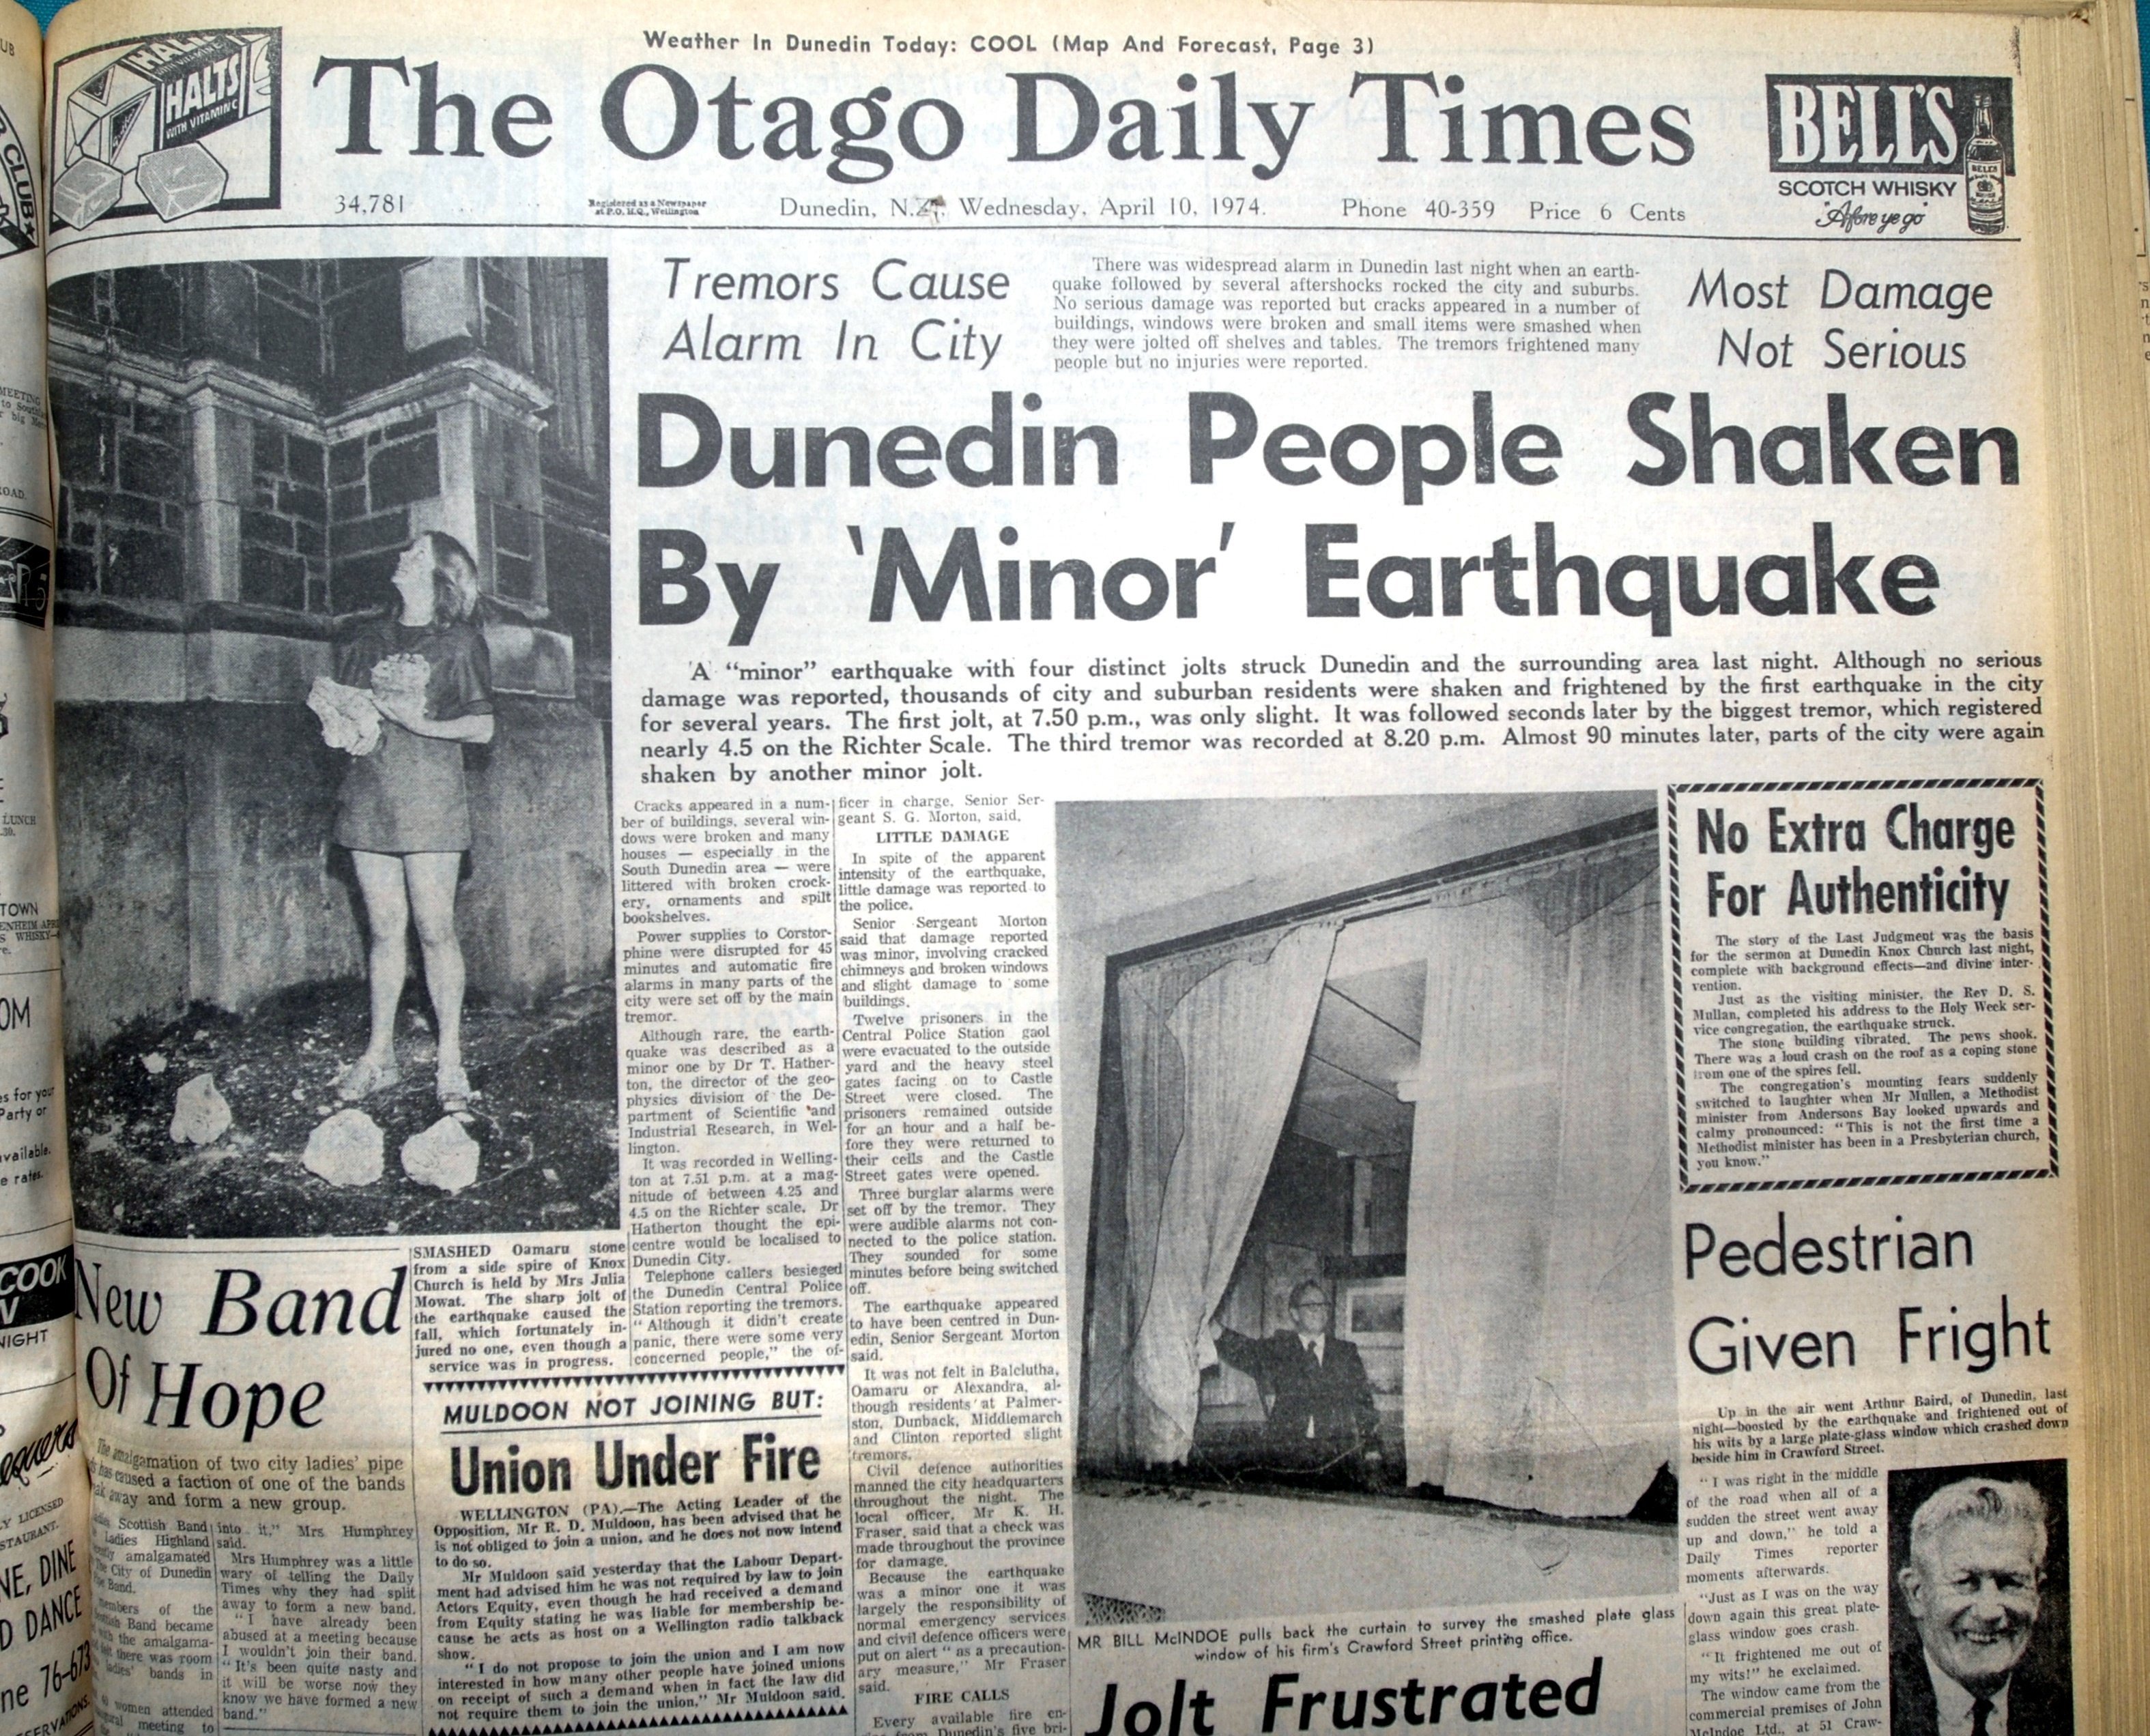 Coverage of the 1974 Dunedin earthquake in the Otago Daily Times. PHOTOS: ODT ARCHIVES